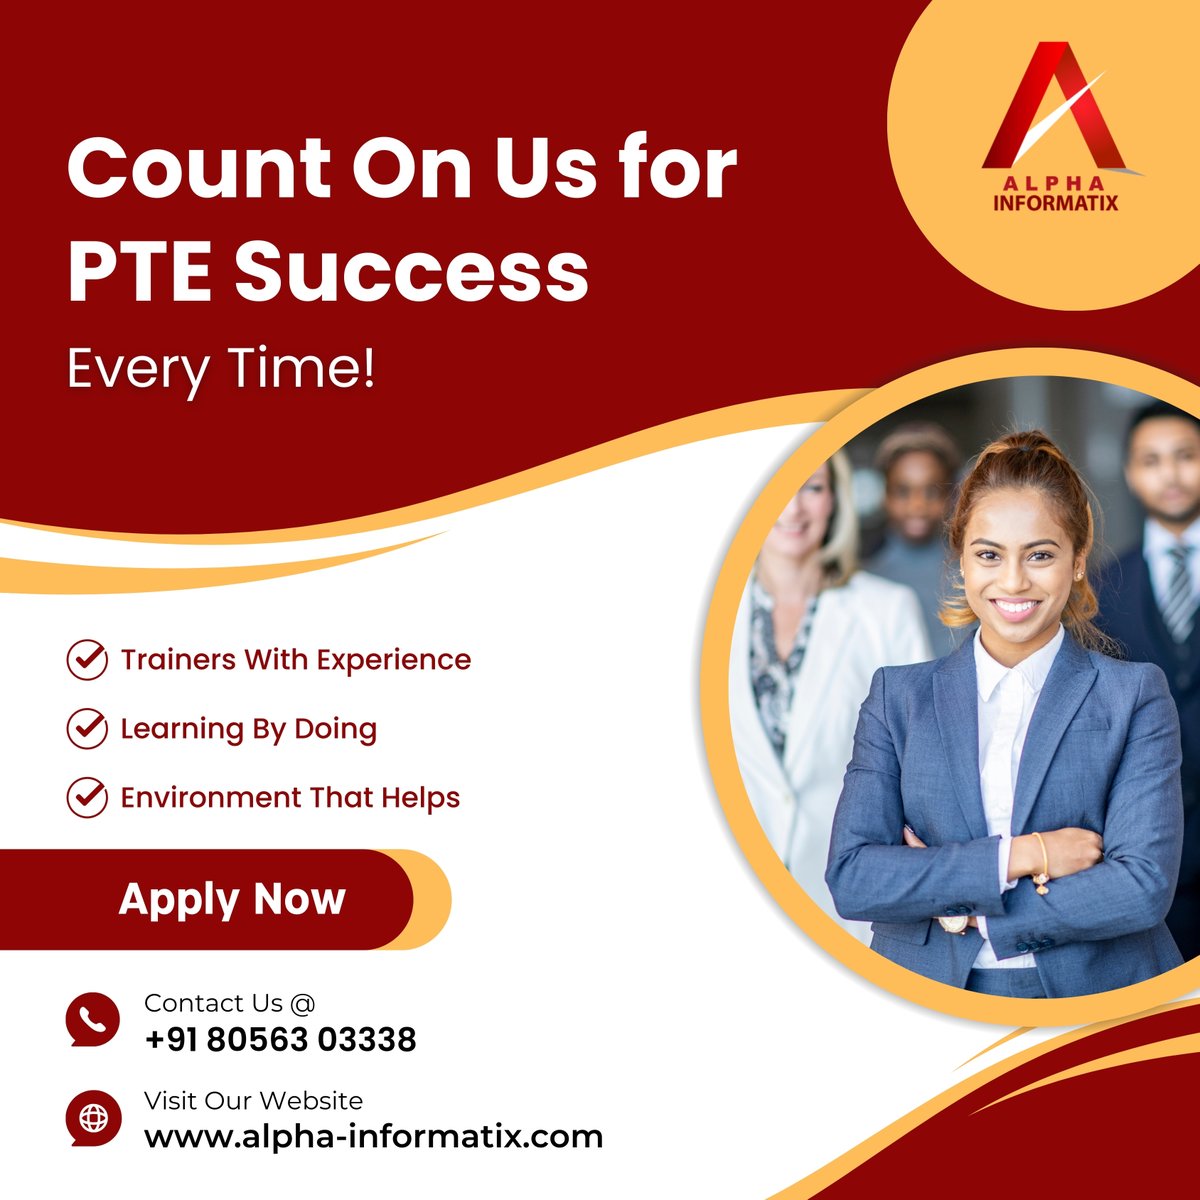 We're your pathway to PTE excellence. Join us and turn your aspirations into achievements!

☎️+91 80563 03338
🌐alpha-informatix.com/pte-coaching-c… 

#PTECoaching
#PTEPreparation
#PTETraining
#PTEExam
#PTEClasses
#PTEExpert
#PTETips
#PTEExamPrep
#PrepareForPTE
#EnglishTest
#PTECoachingCenter